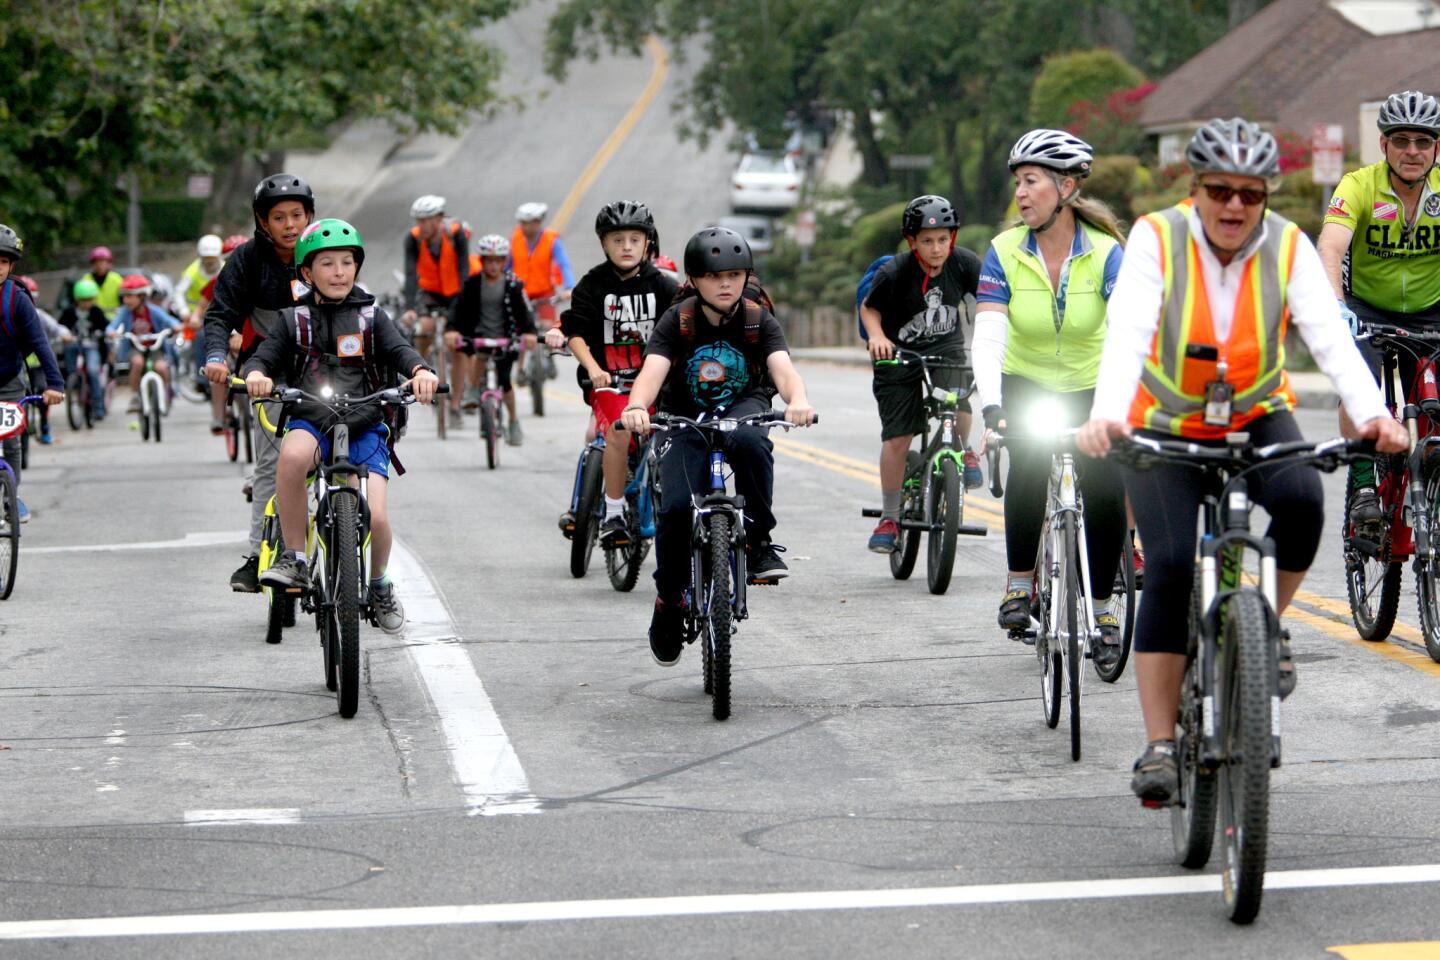 Verdugo Woodlands Elementary School students, parents and volunteers participate in Bike to School Day in Glendale on Wednesday, May 4, 2016. The ride began at the First Congregational Church and traveled south on Niodrara Dr. into Verdugo Park and finally into the back entrance to the school on Colina Drive.